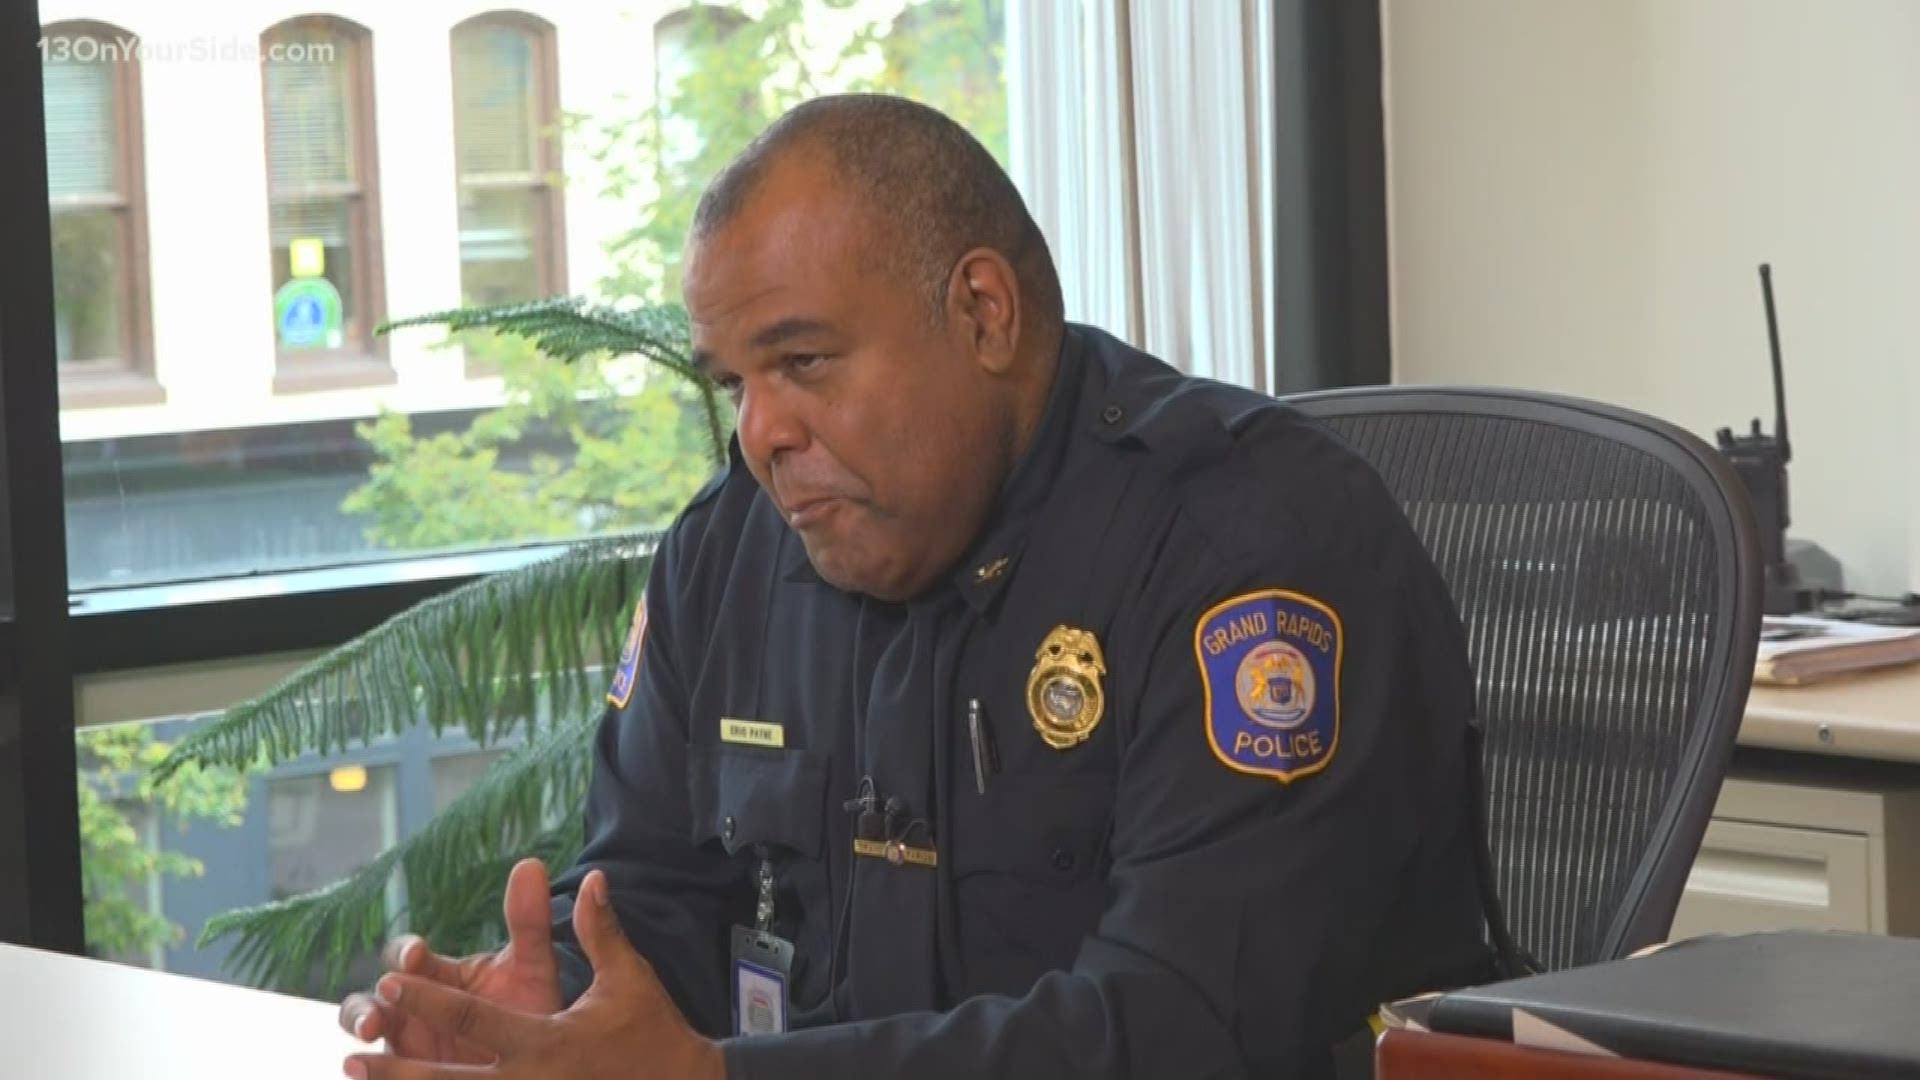 Thursday, Oct. 24, Chief Eric Payne held a press conference to thank the Grand Rapids community for their support and cooperation in recent crimes.